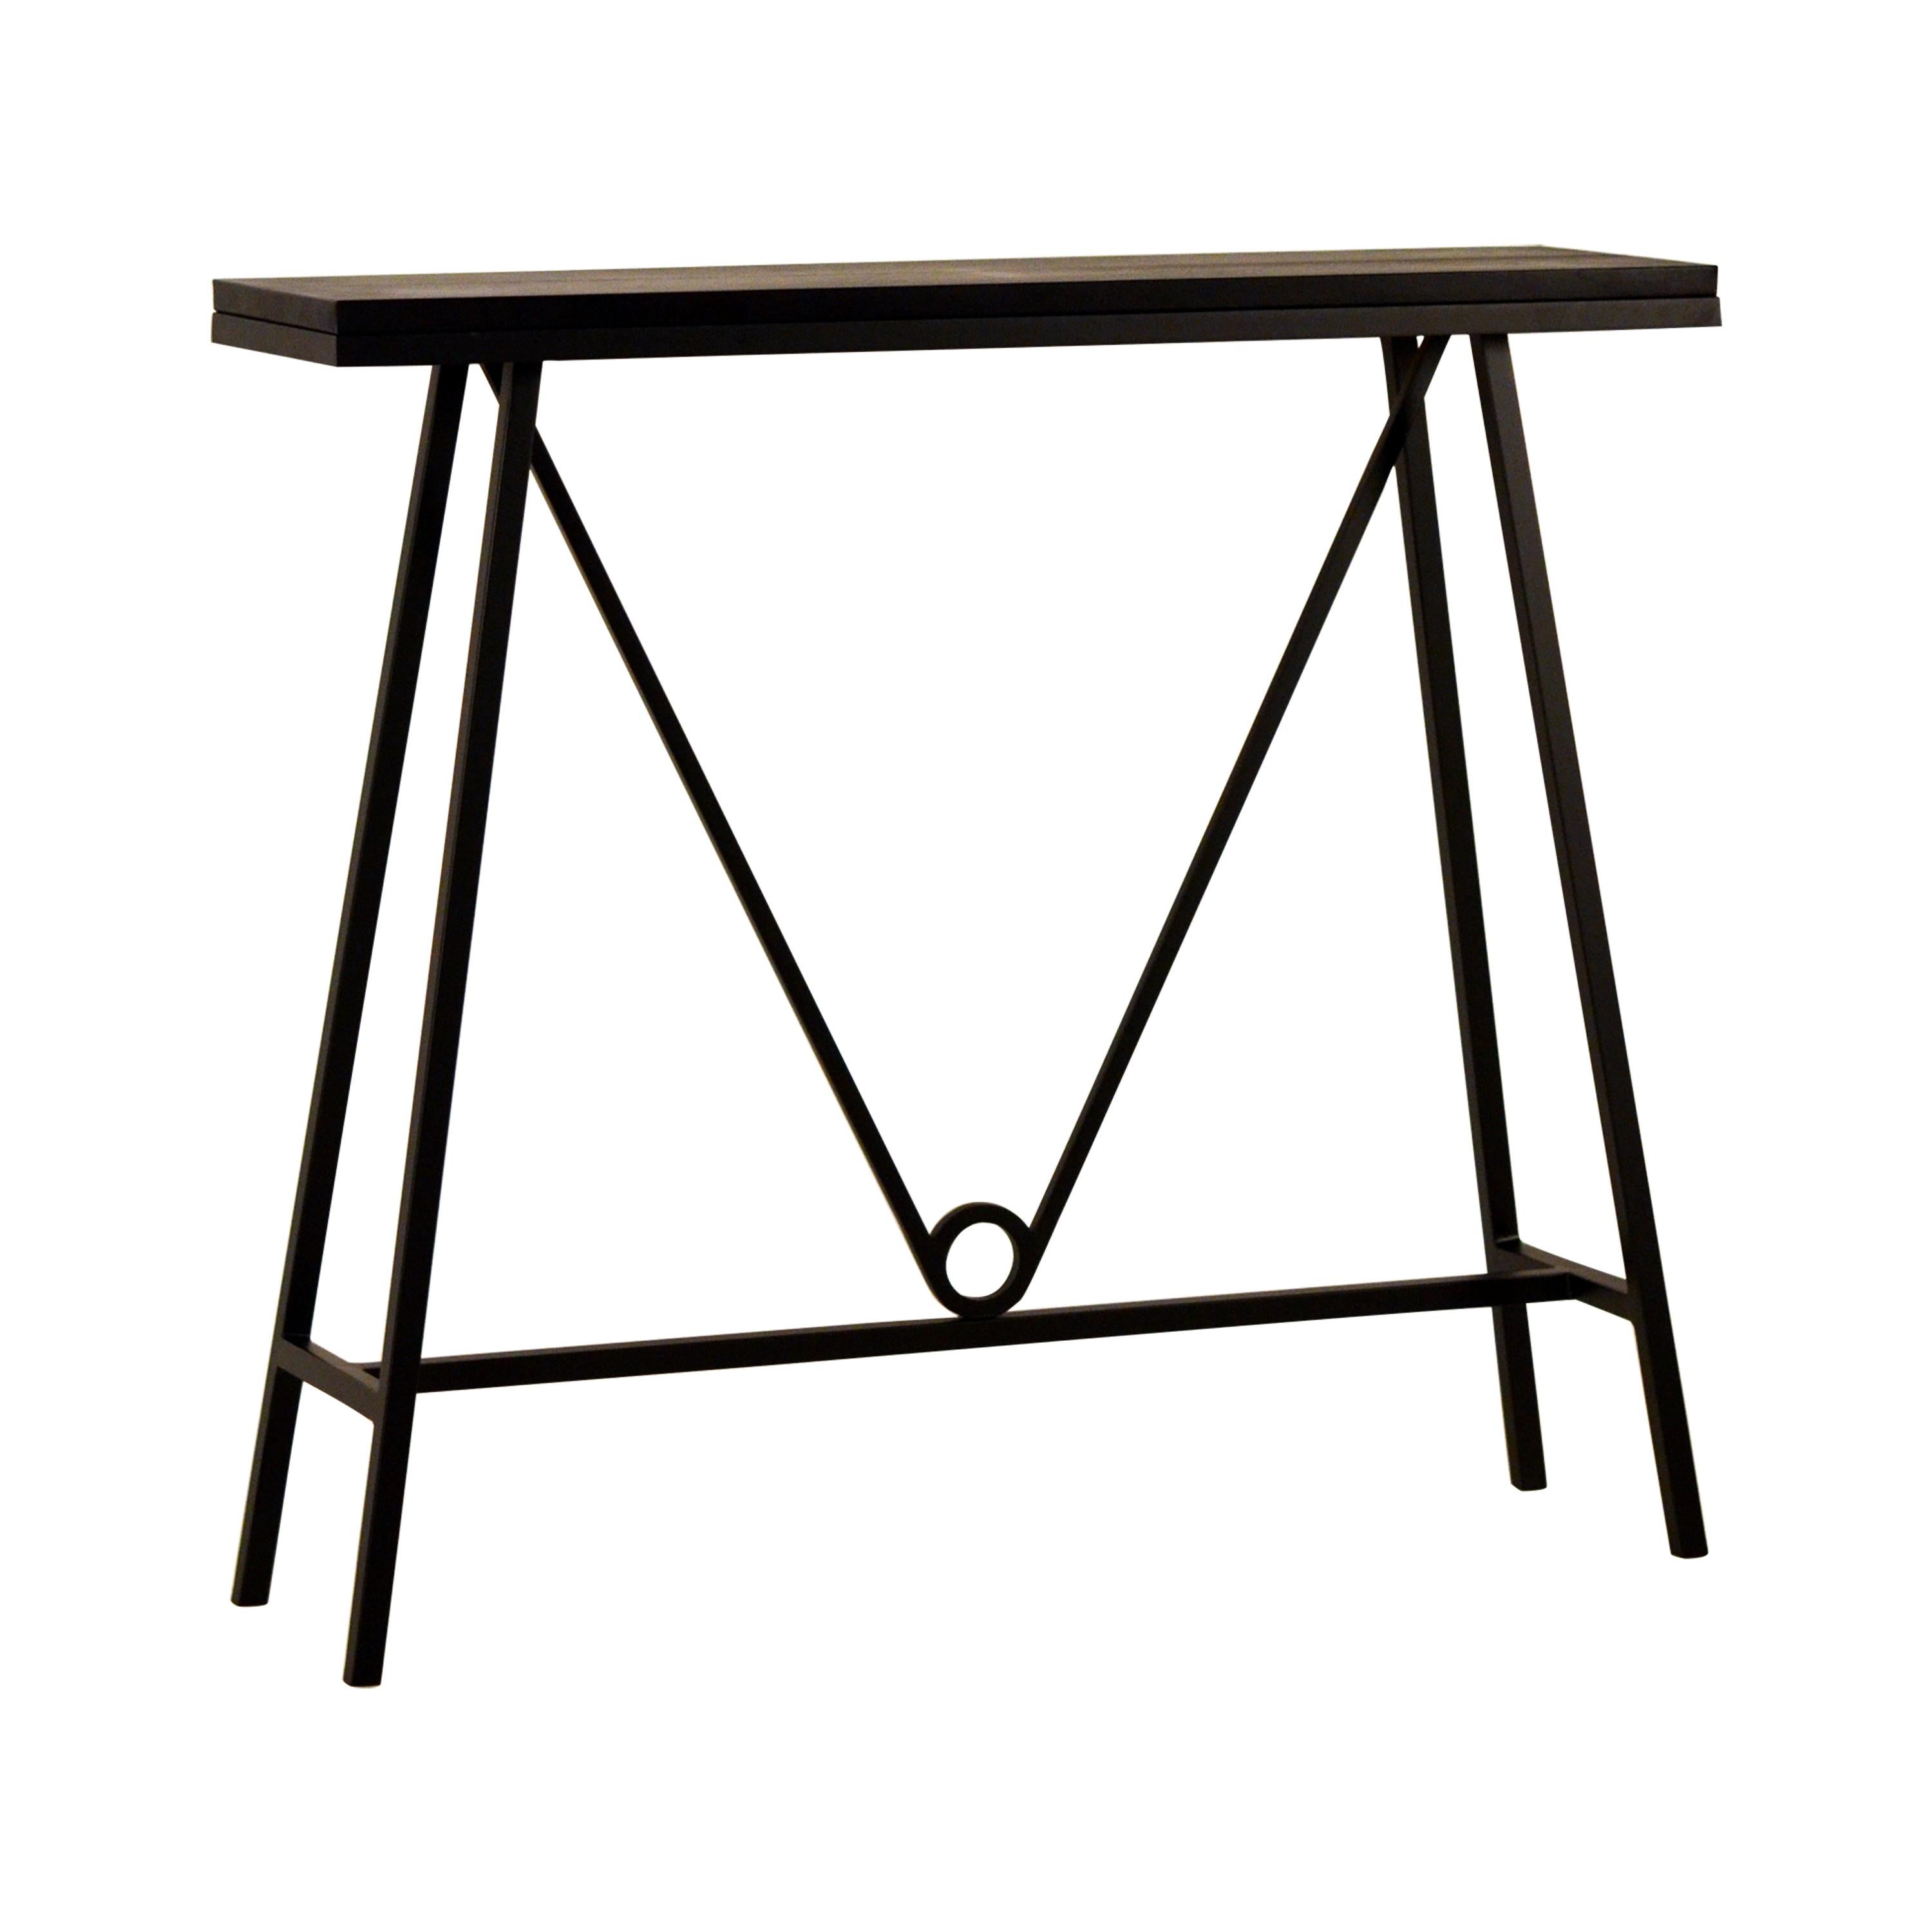 'Trapèze' Blackened Steel and Goatskin Console by Design Frères For Sale